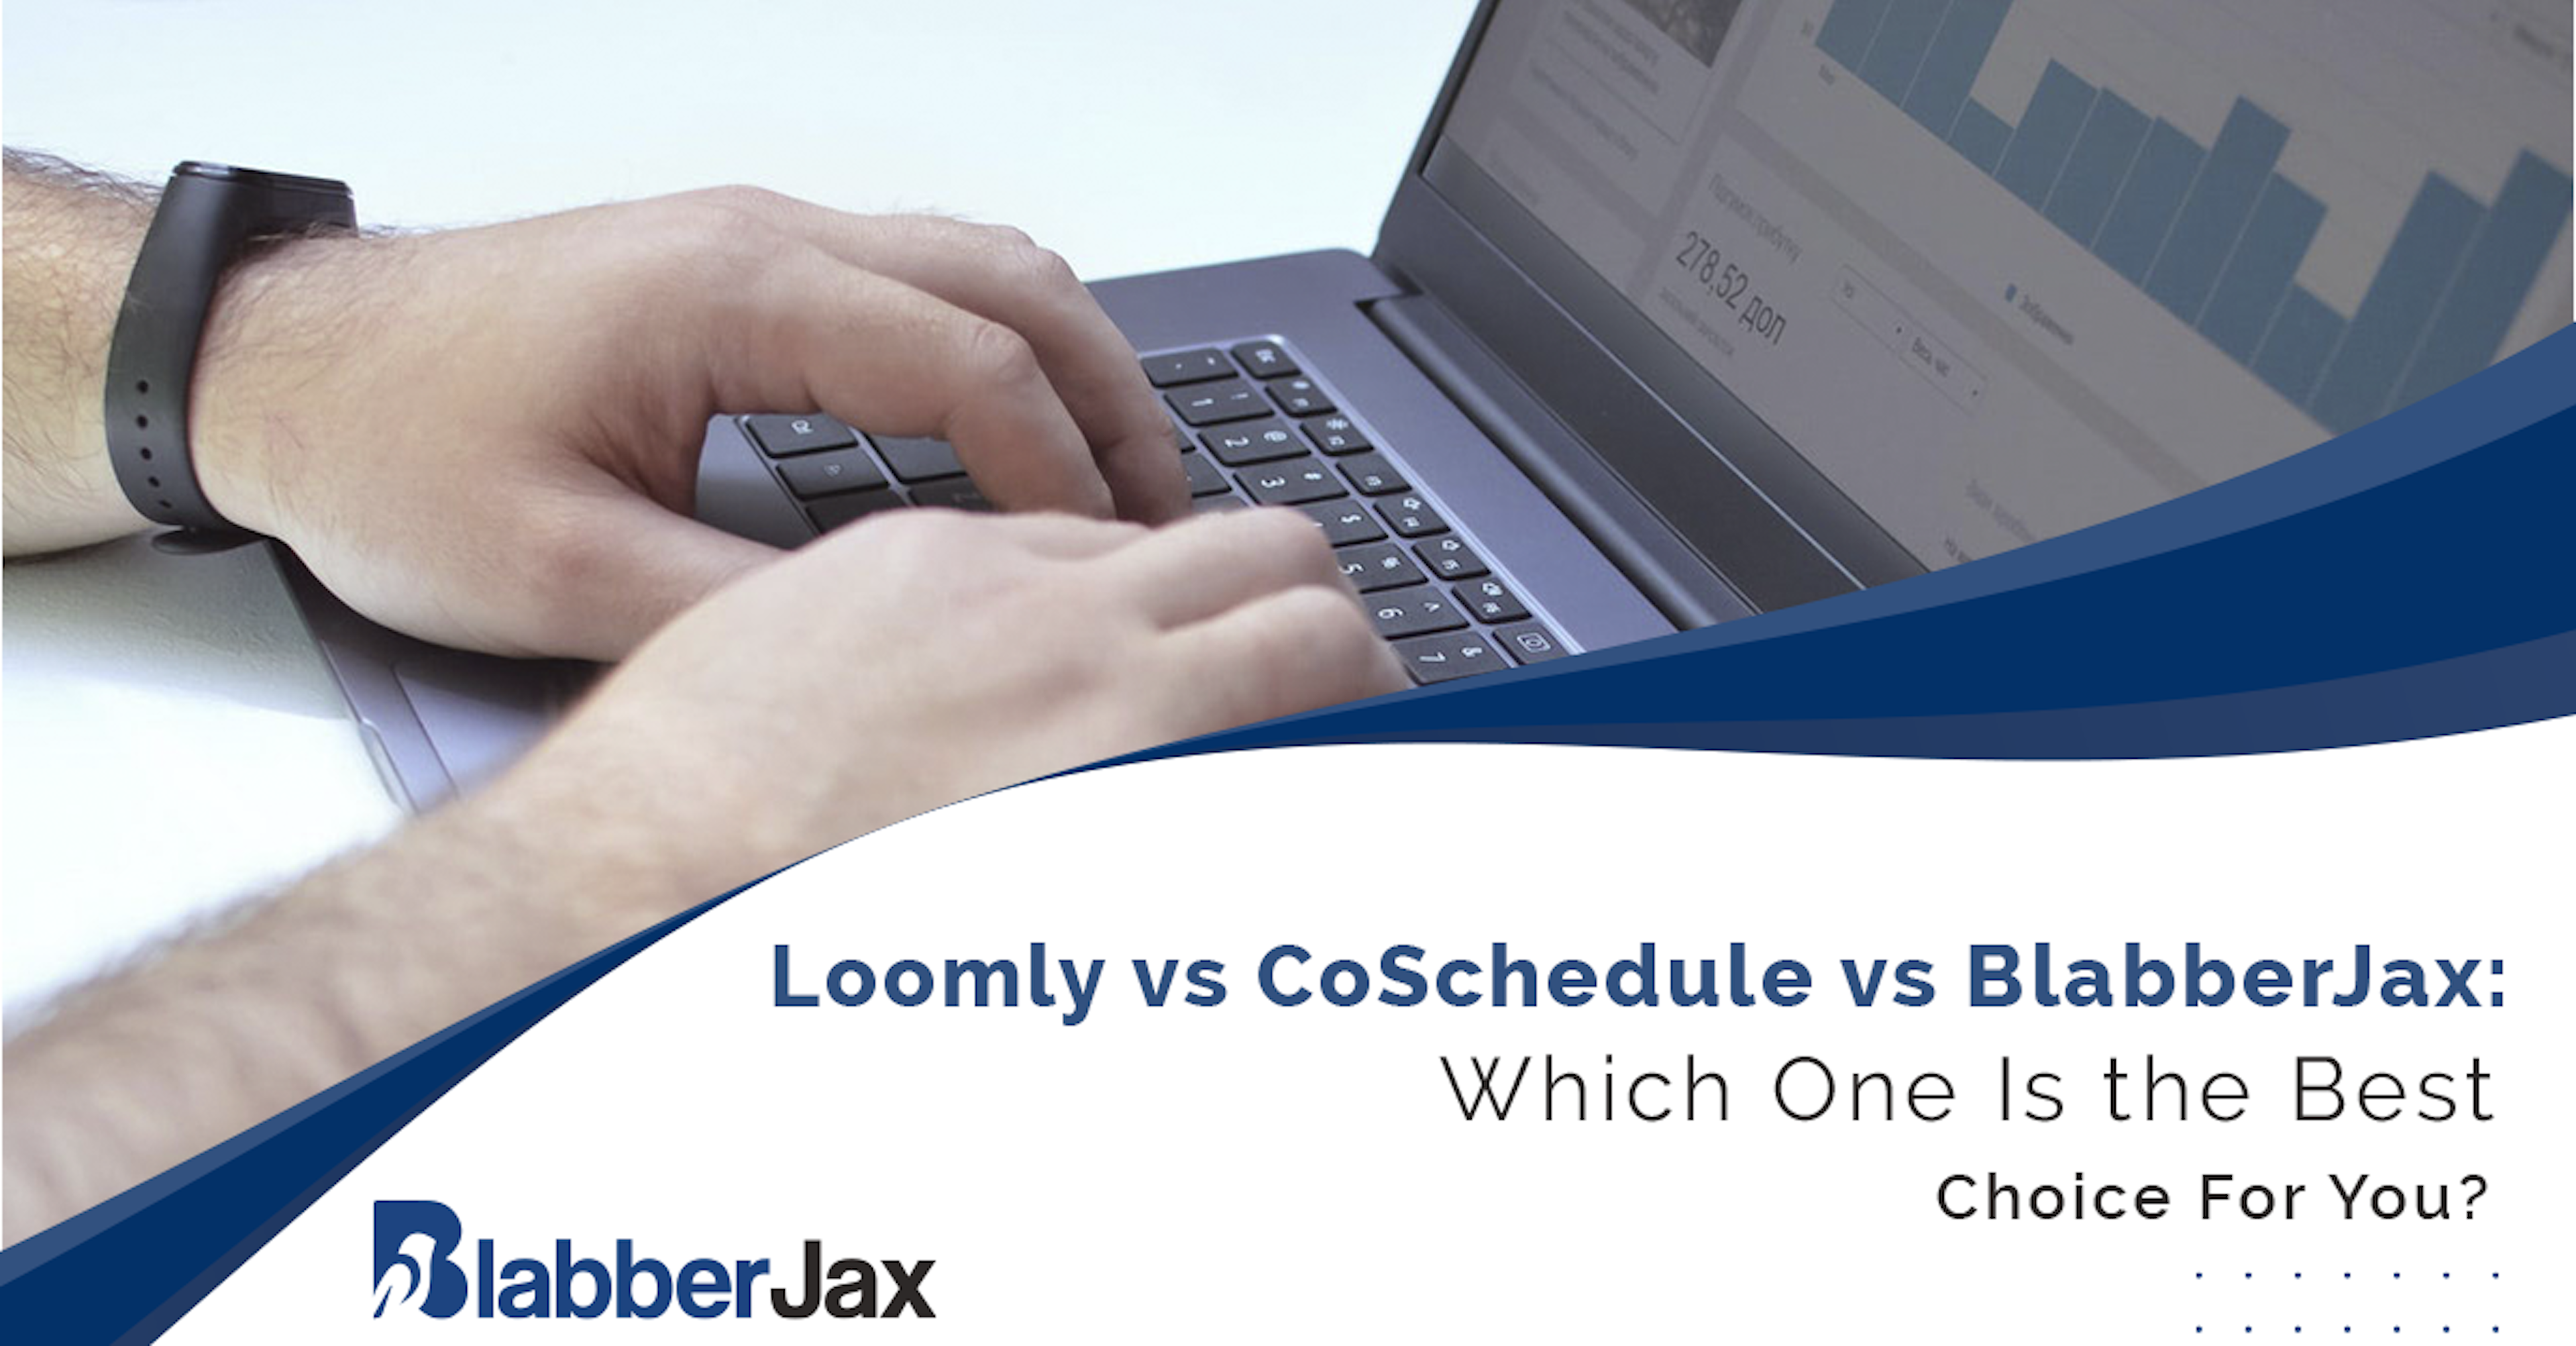 Loomly vs CoSchedule vs BlabberJax: Which One Is the Best Choice For You?